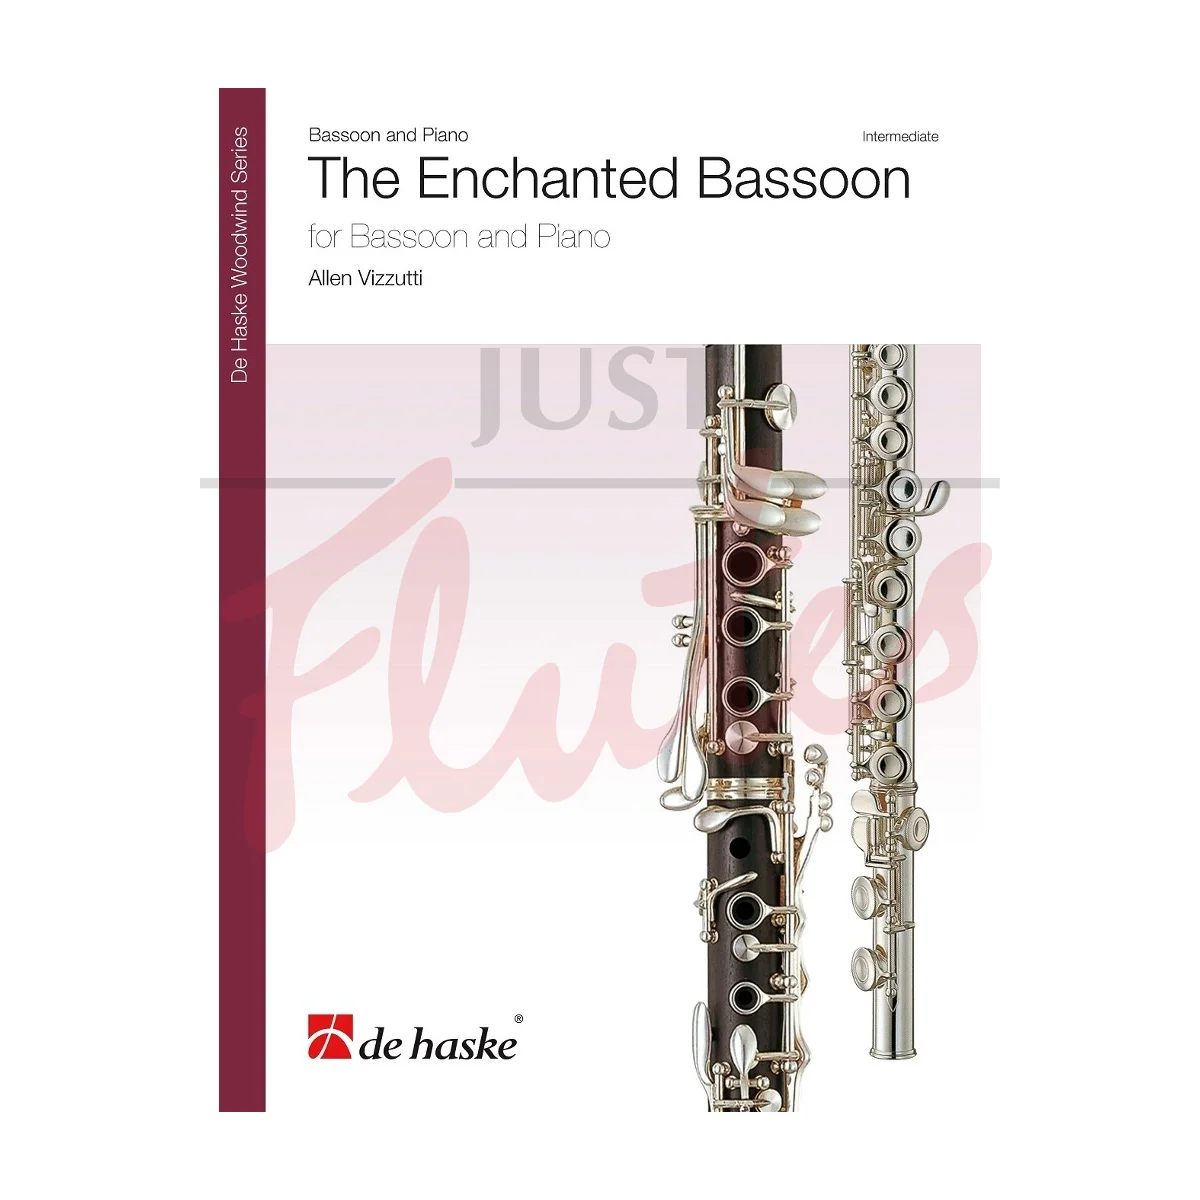 The Enchanted Bassoon for Bassoon and Piano